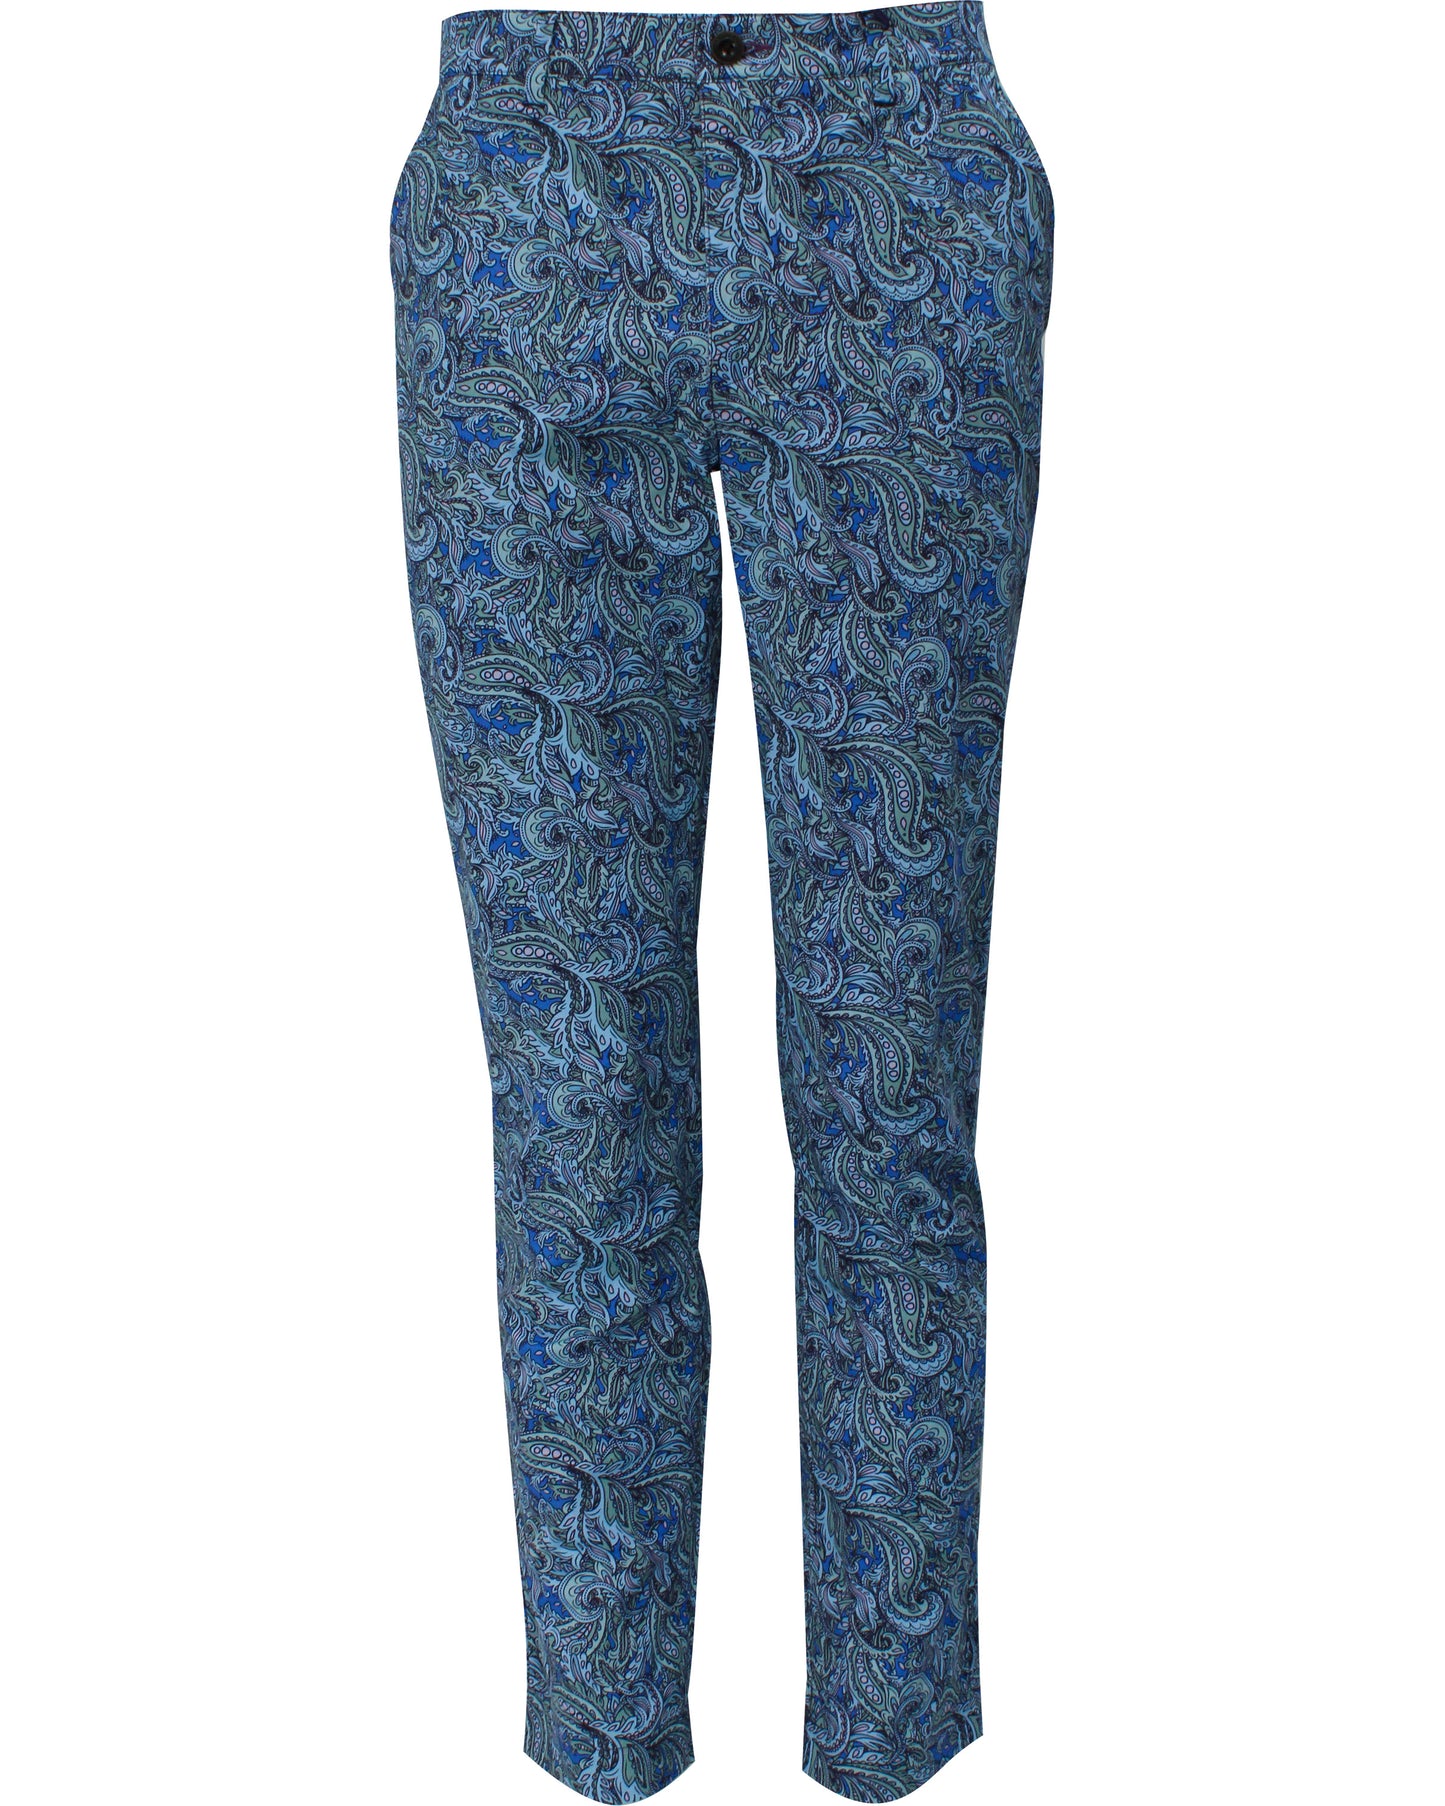 CHARLES PAISLEY GOAL PANT IN OCEAN – Lords Of Harlech